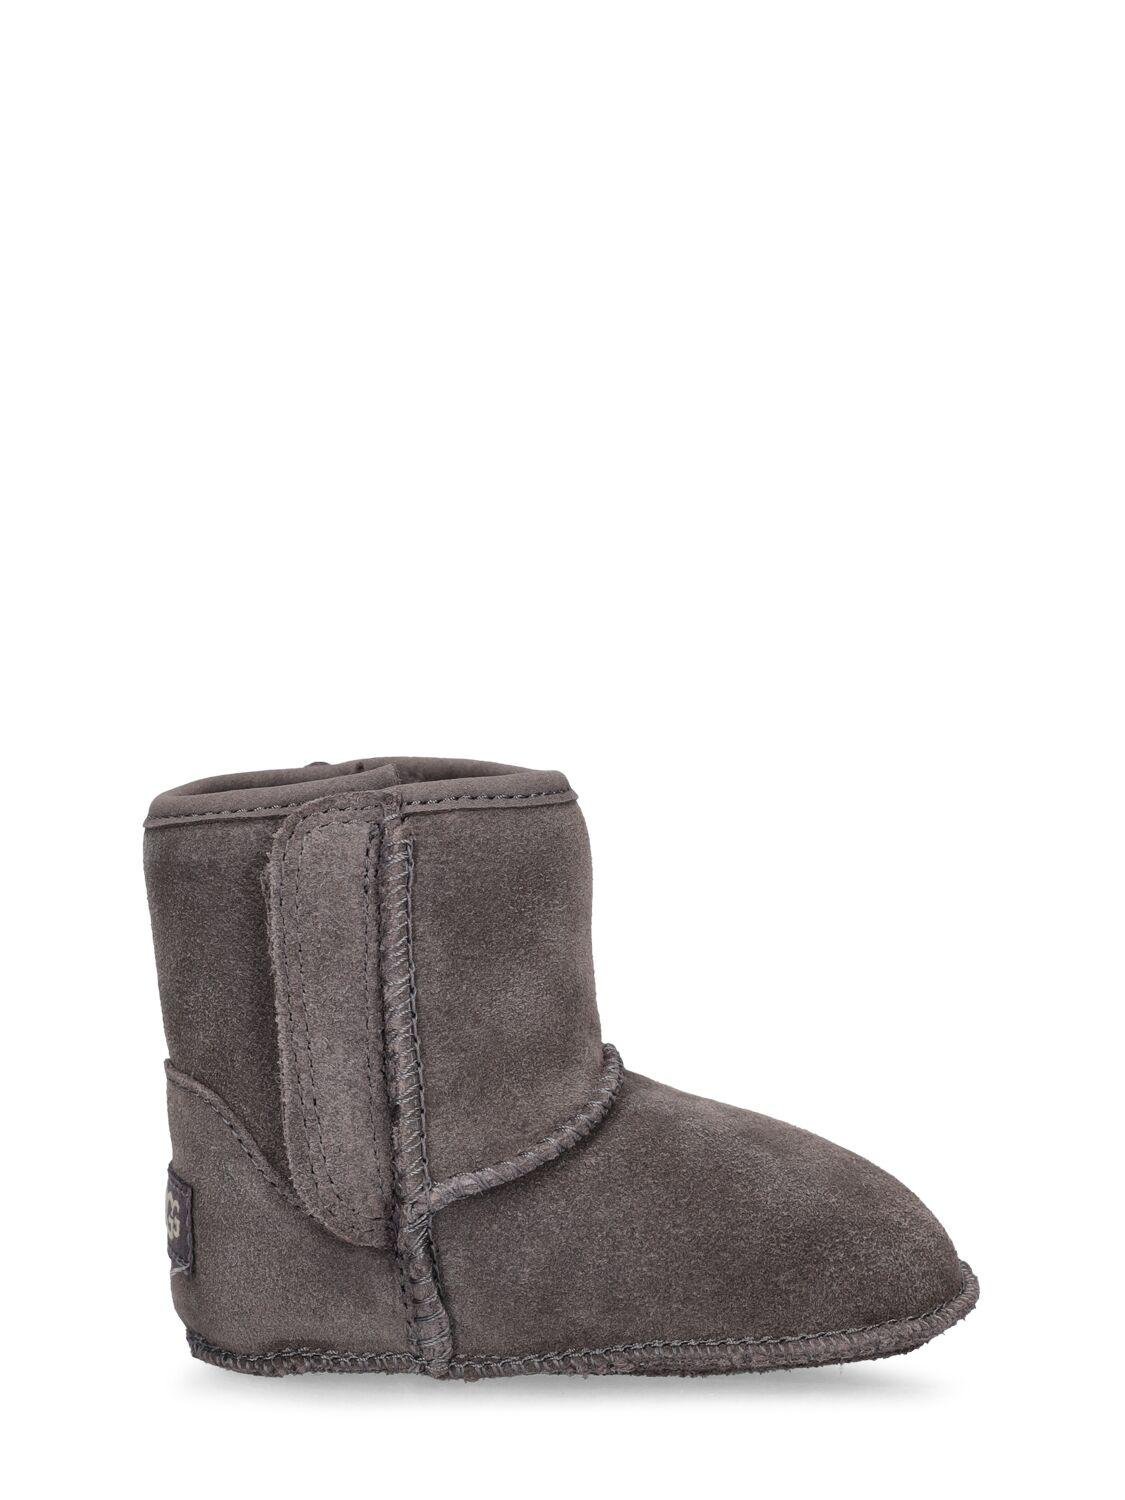 Baby Classic Shearling Boots by UGG